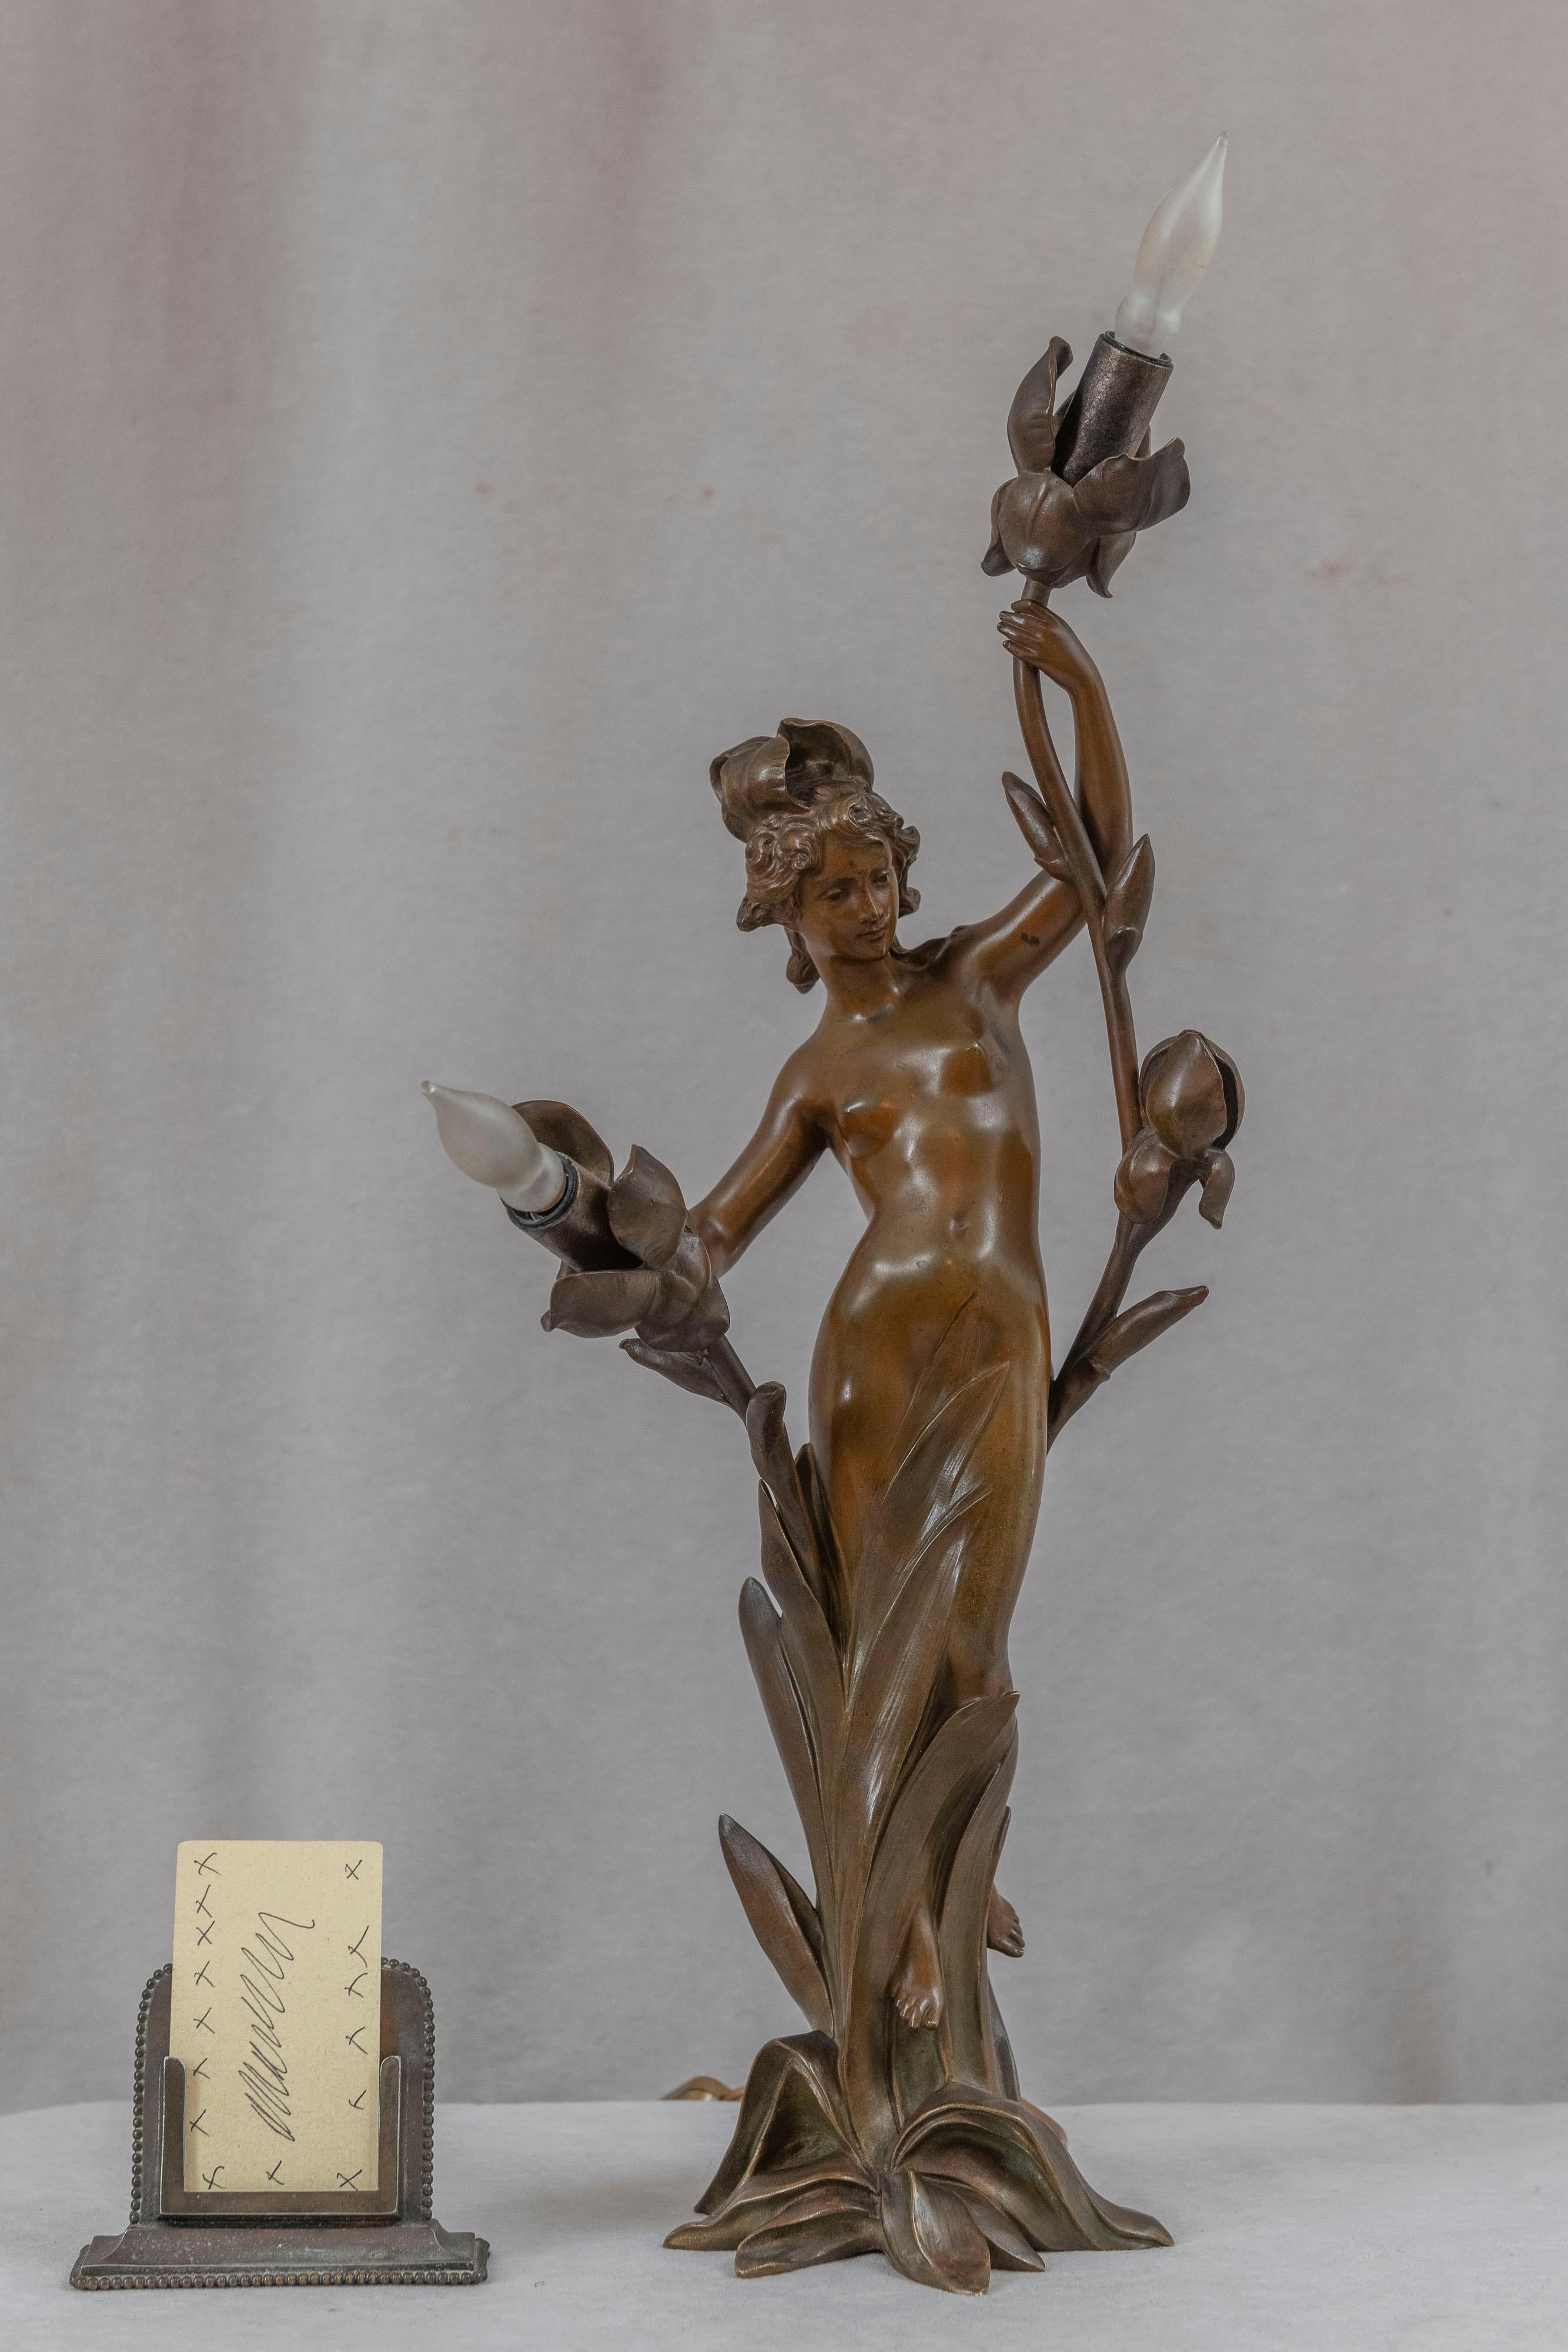  We are art nouveau lovers as one might be able to see looking at our inventory. Lamps are always at the top of our 